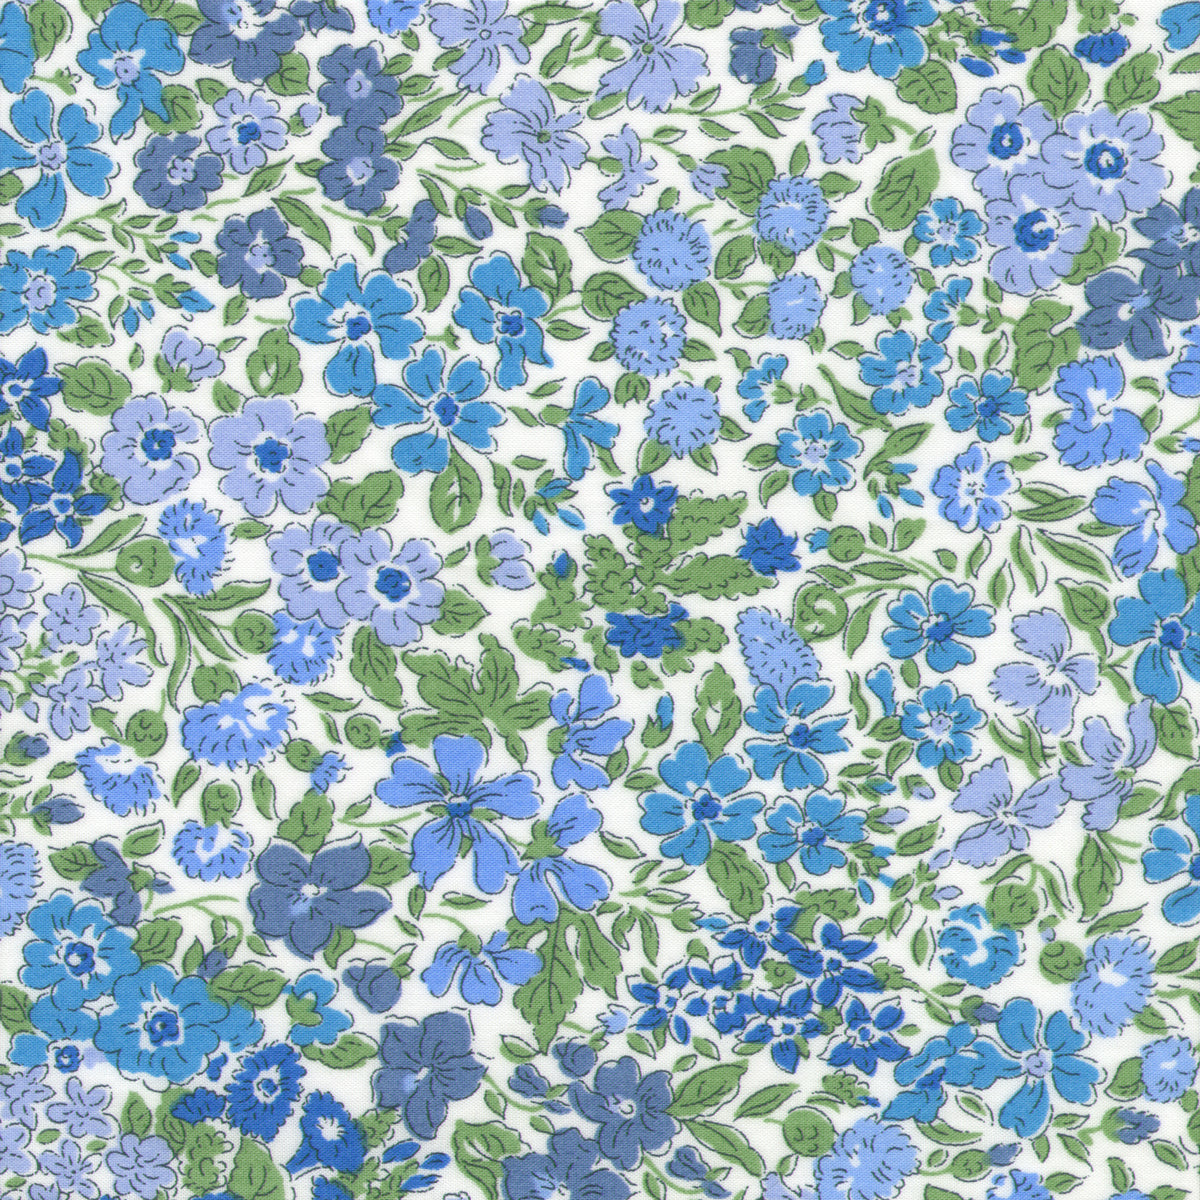 Made-to-Order Fabric in Blue/Green Joanna Louise Liberty Fabric